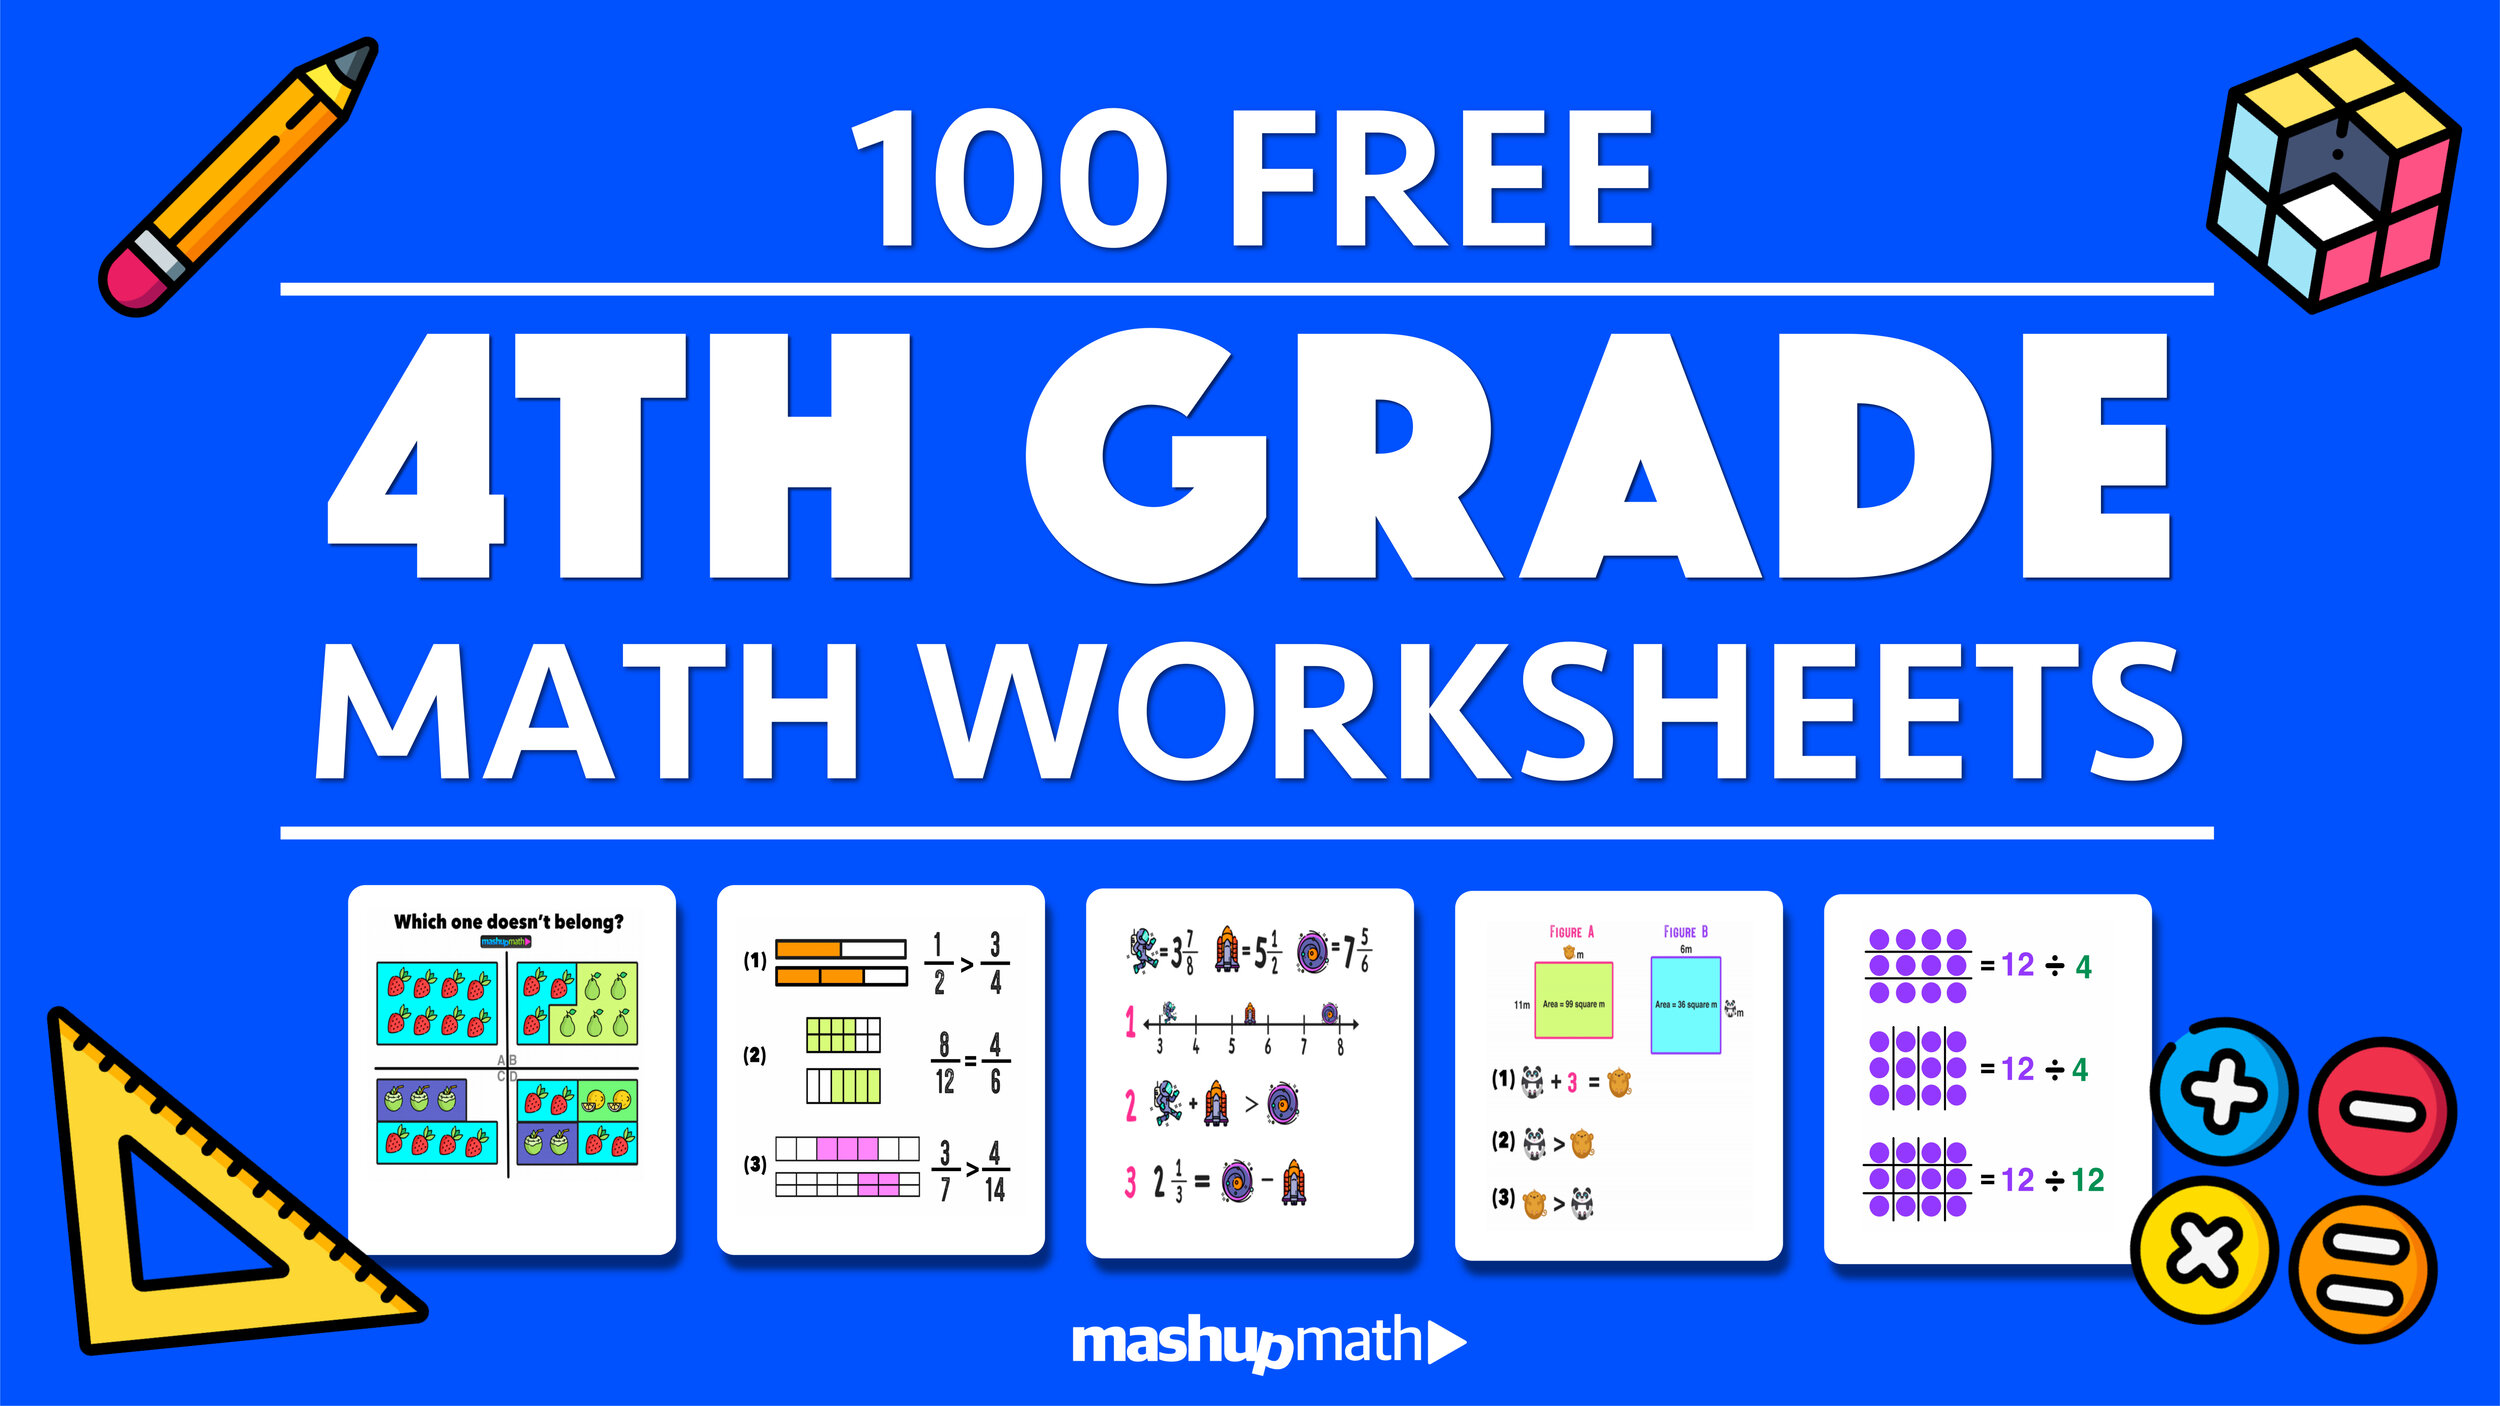 100 Free 4th Grade Math Worksheets with Answers